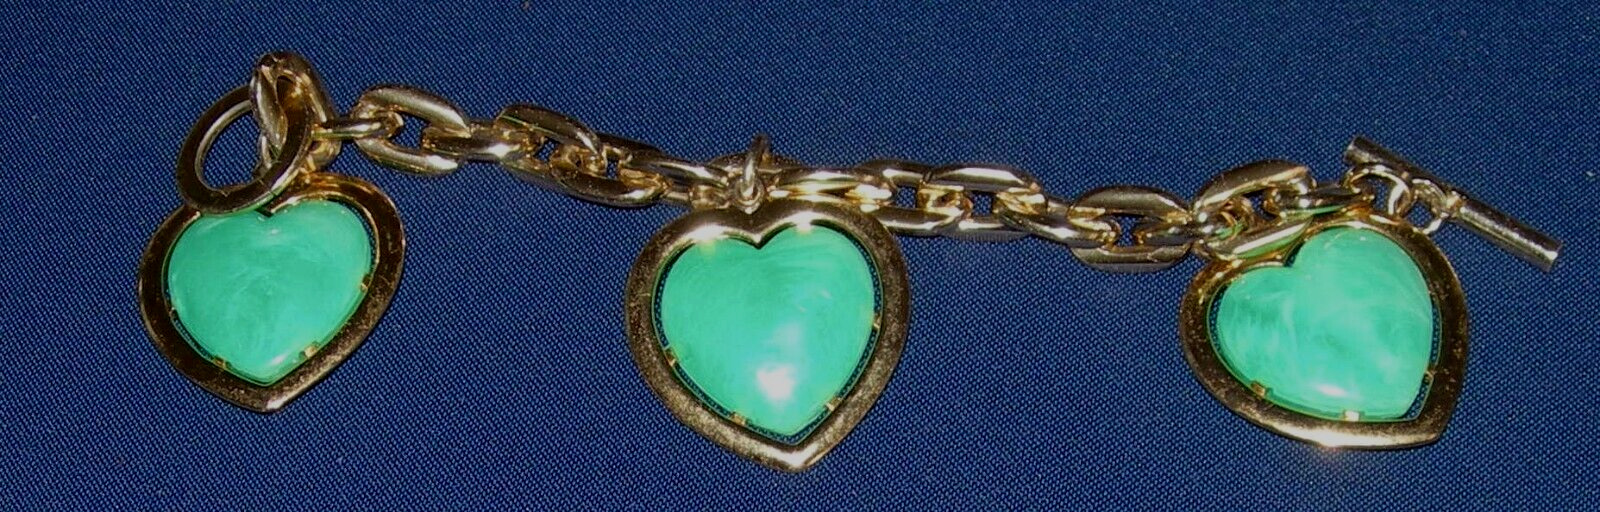 Vintage 70's Goldtone Large Link Bracelet Chunky with Green Plastic Heart Charms